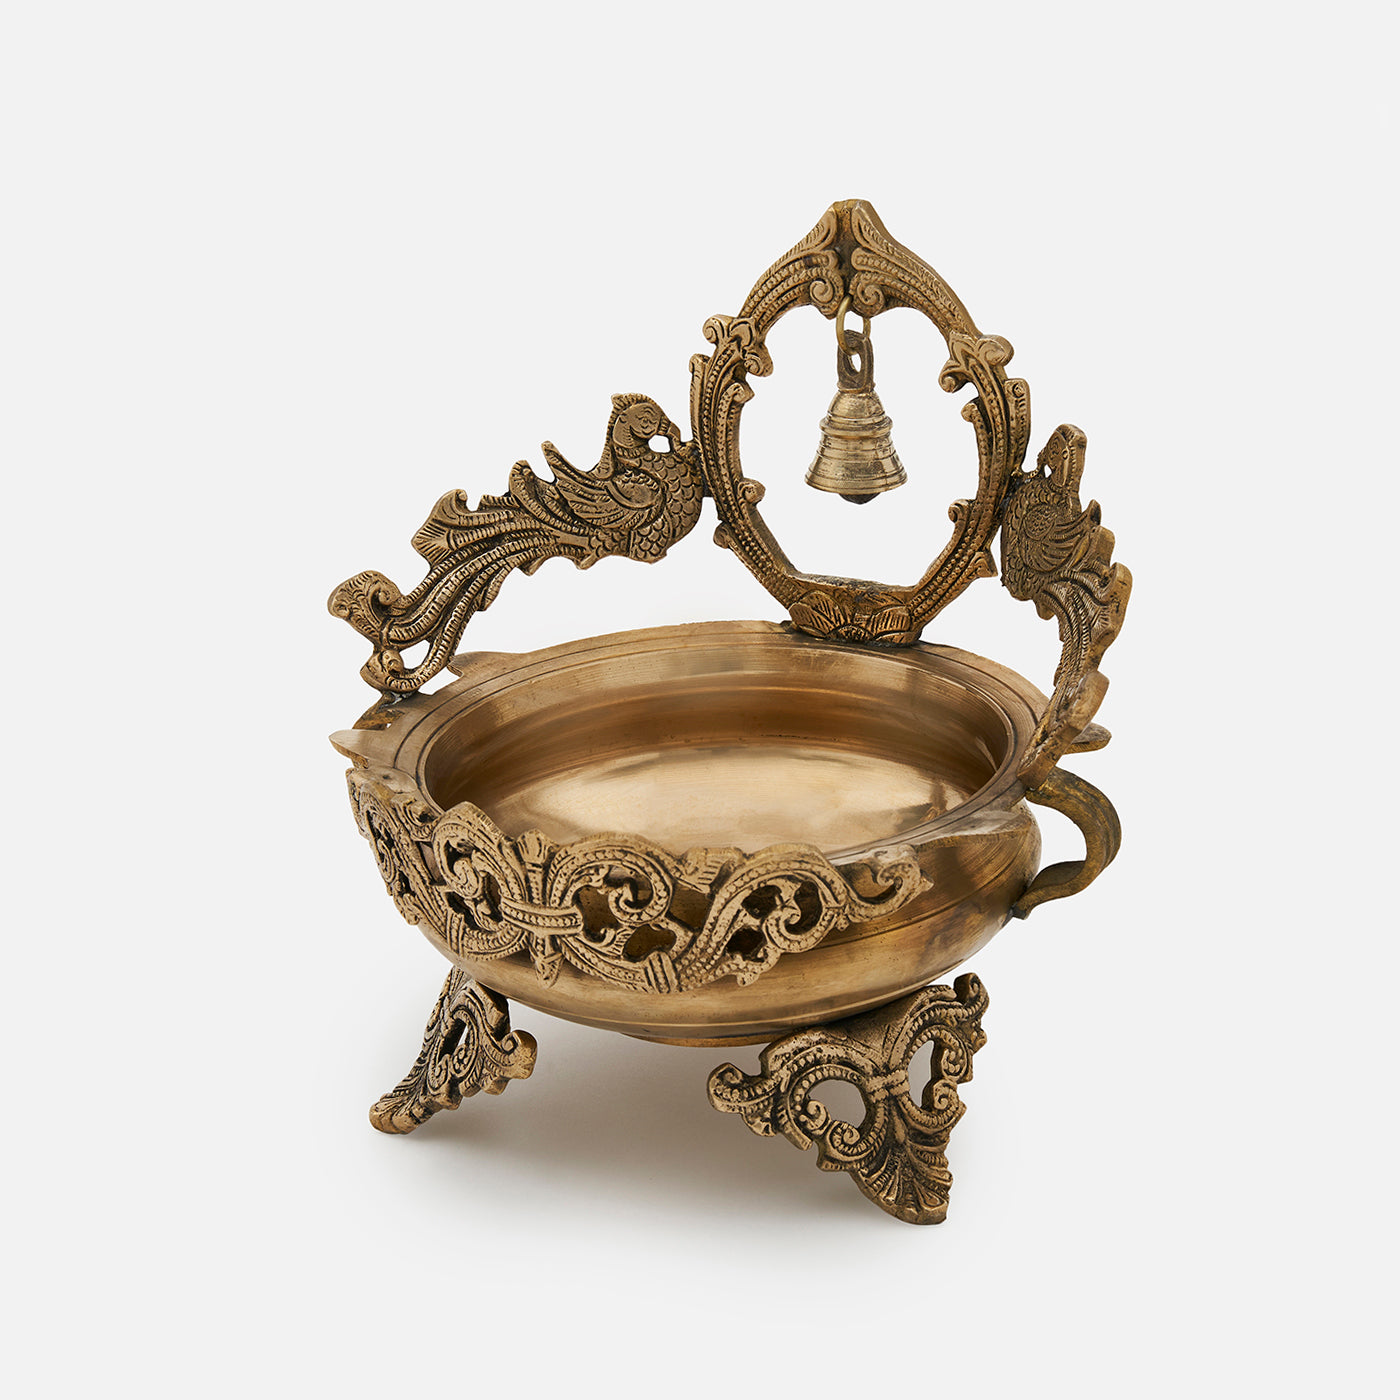 Ethnic Carved Traditional Decorative Brass Bird Urli Bowl with Bell